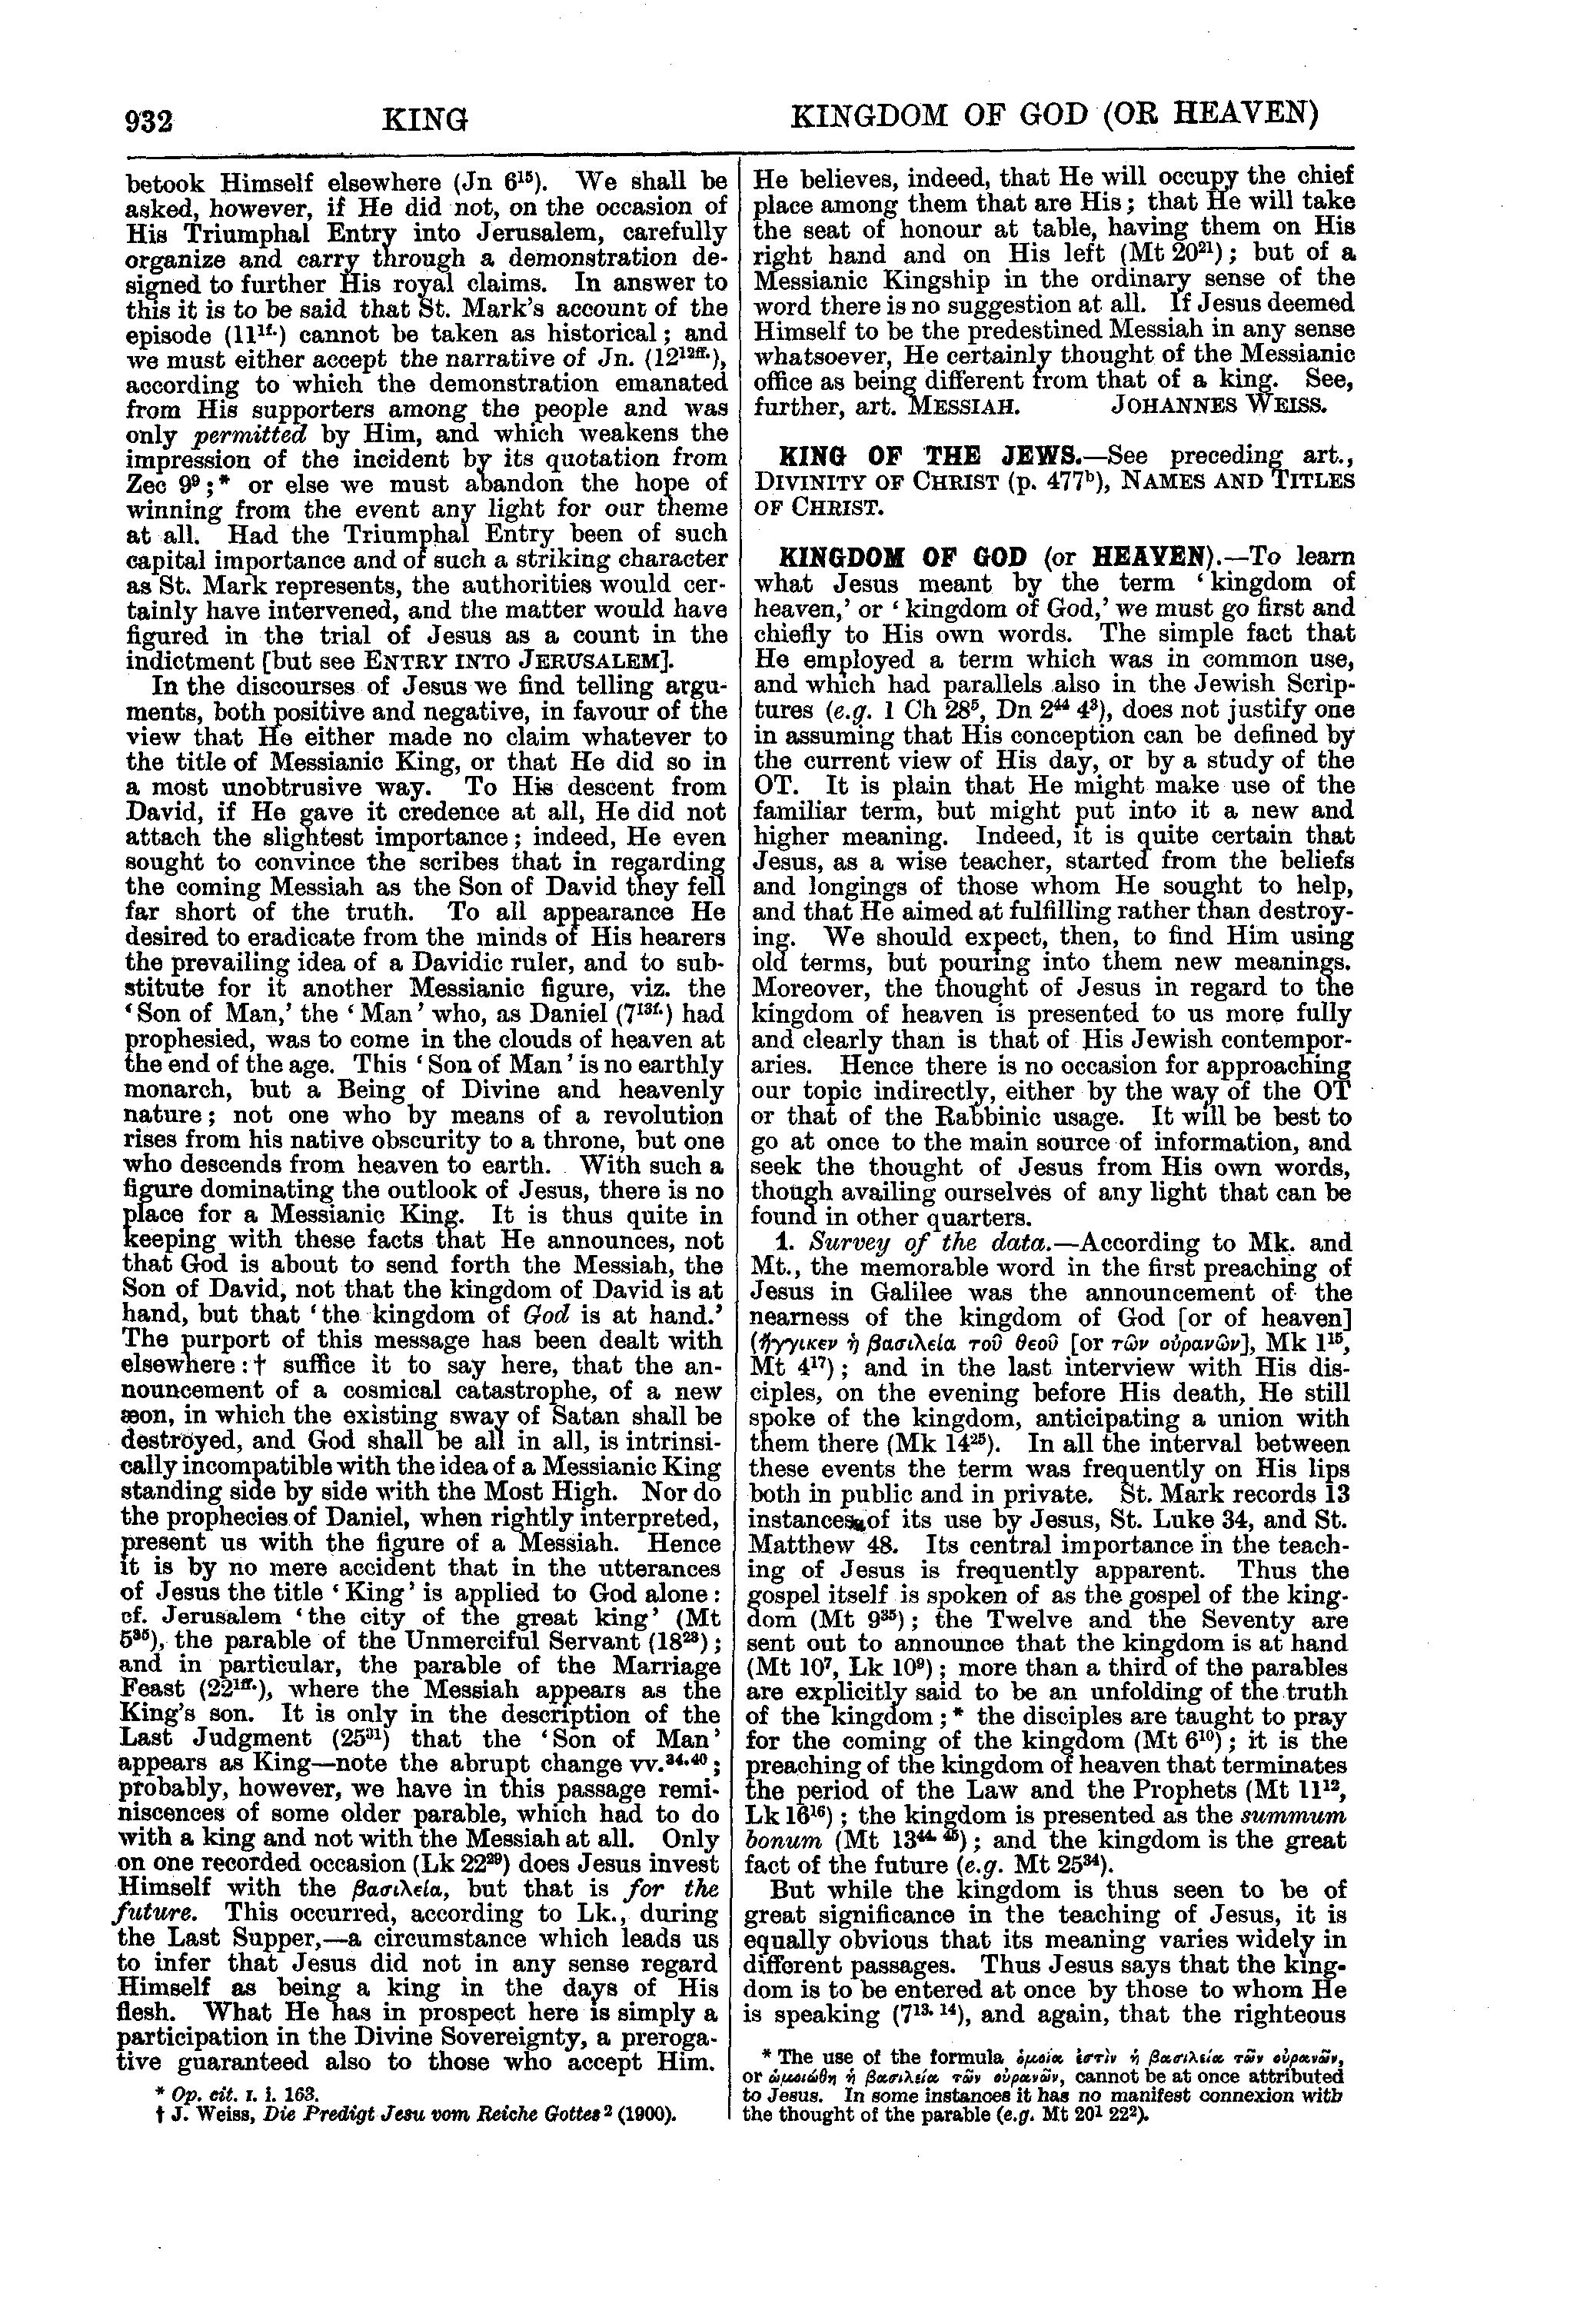 Image of page 932